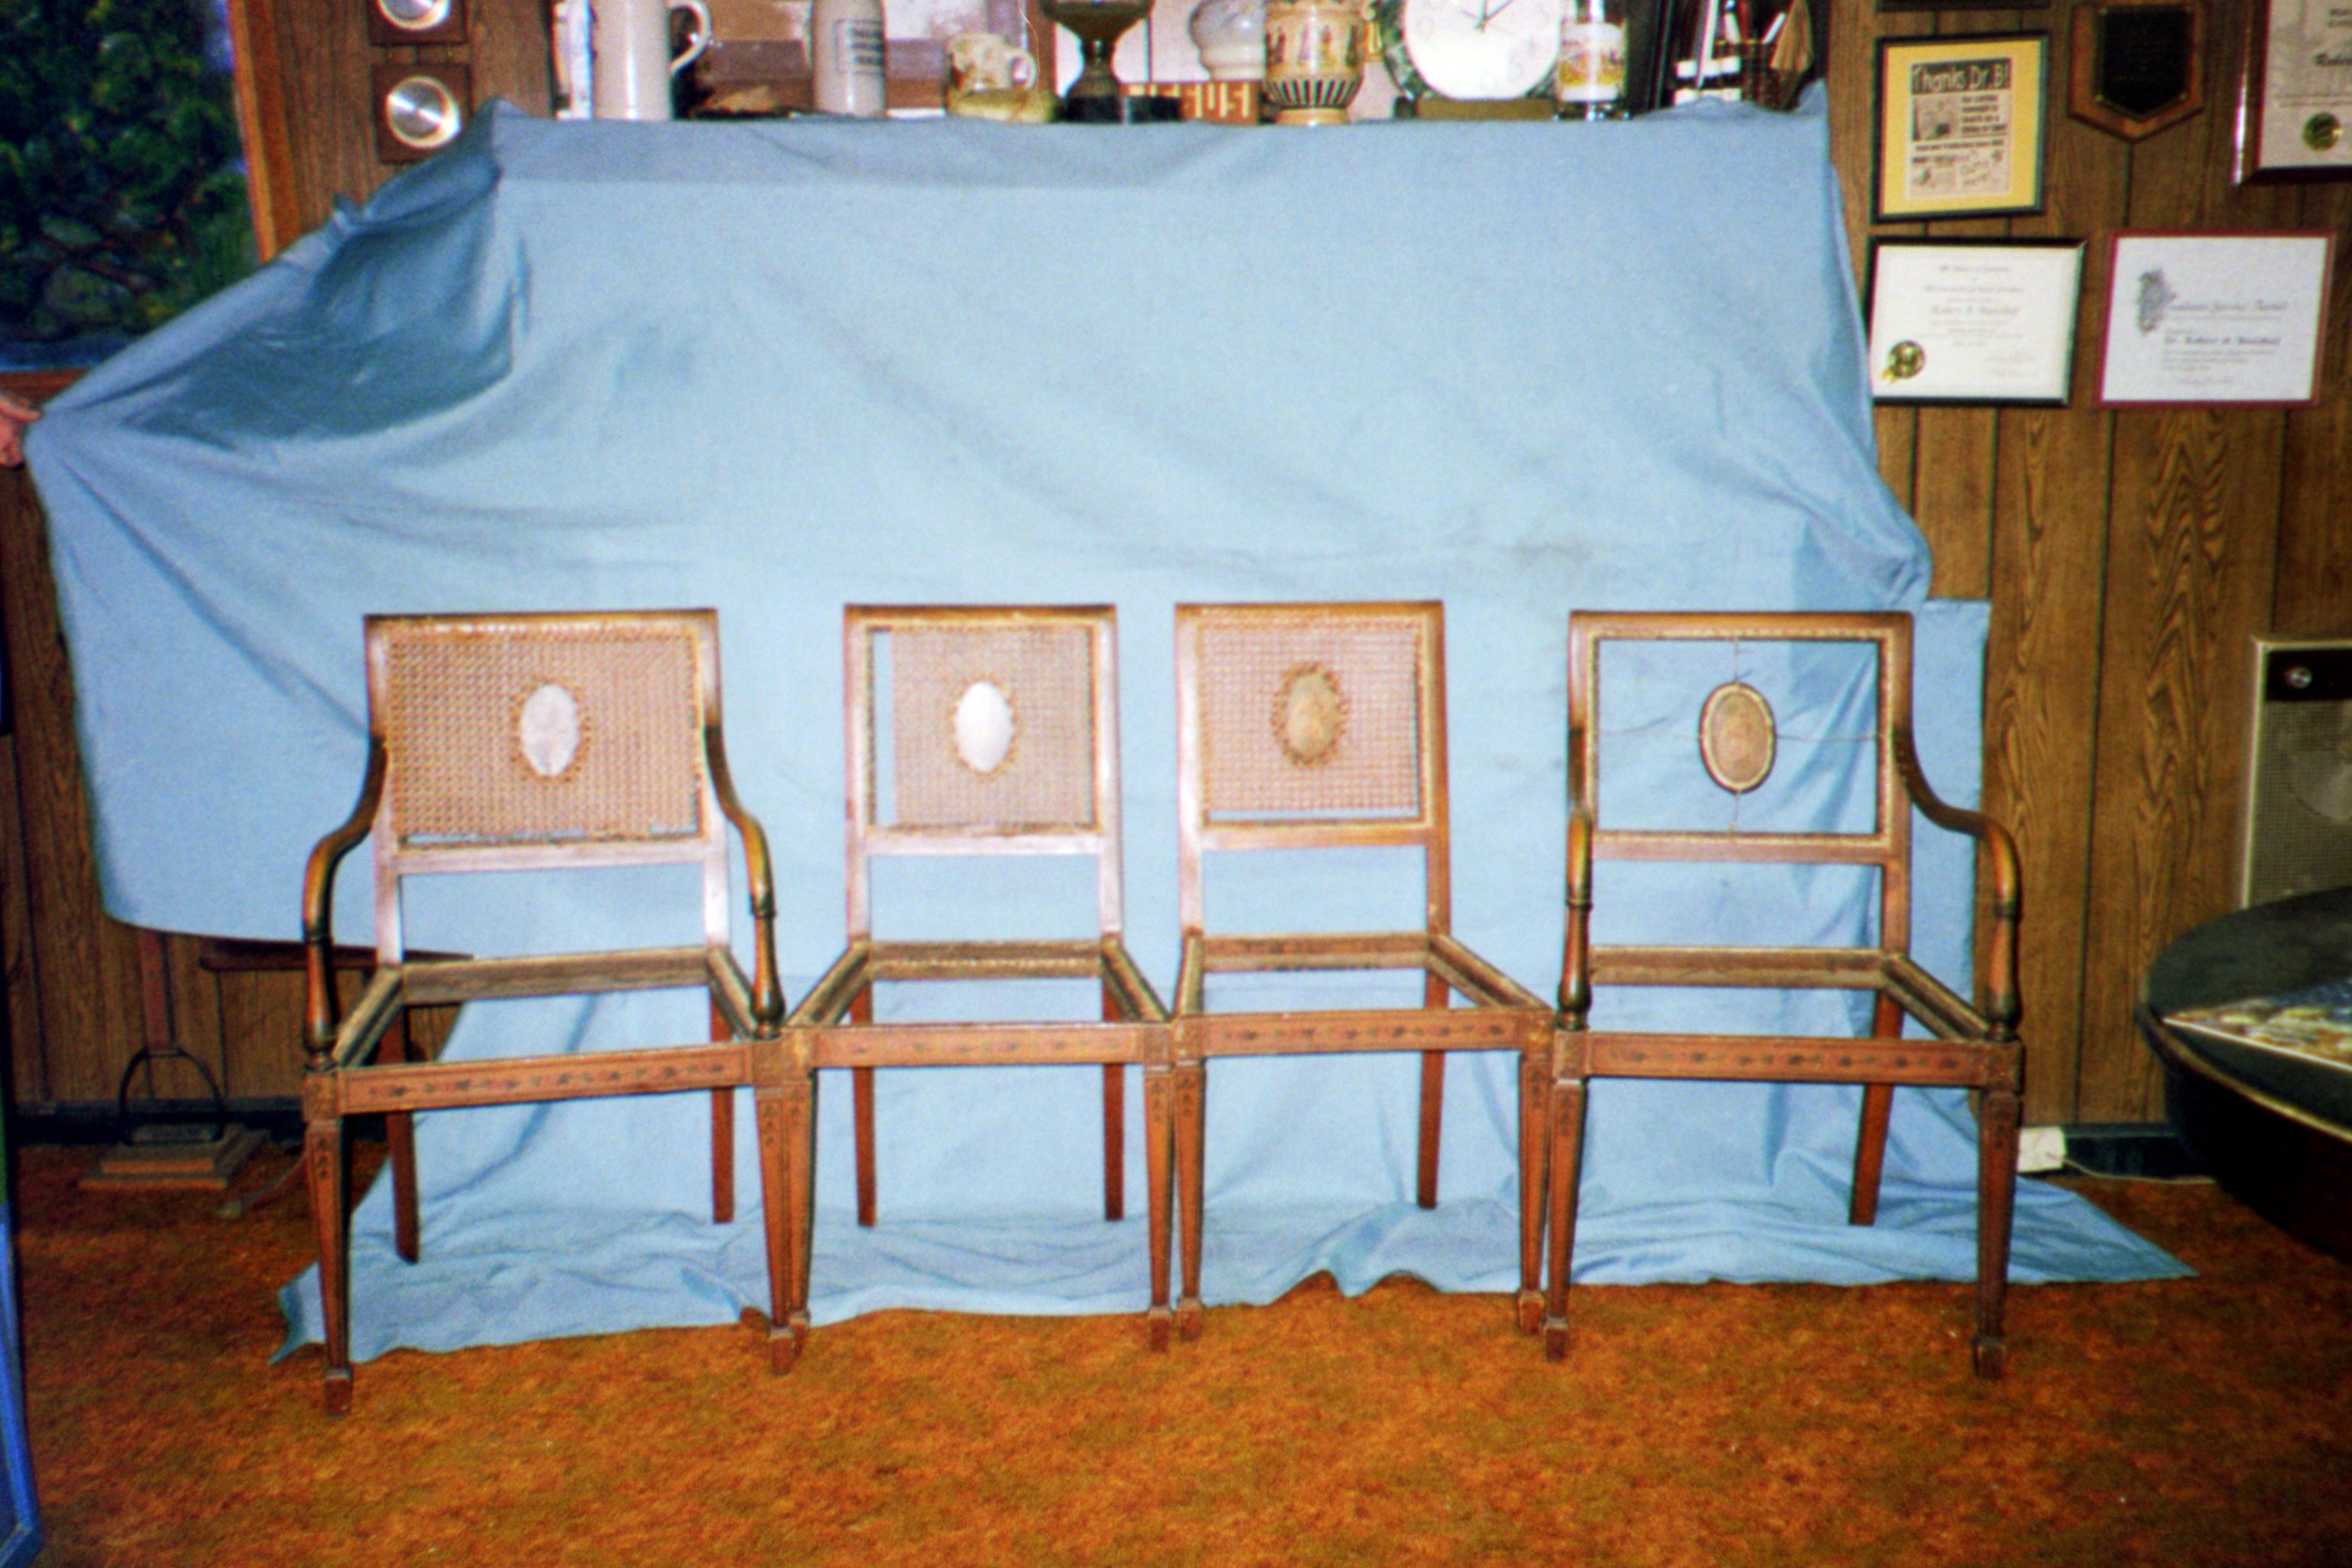 6 chairs longing to be
                  restored to their uniform glory